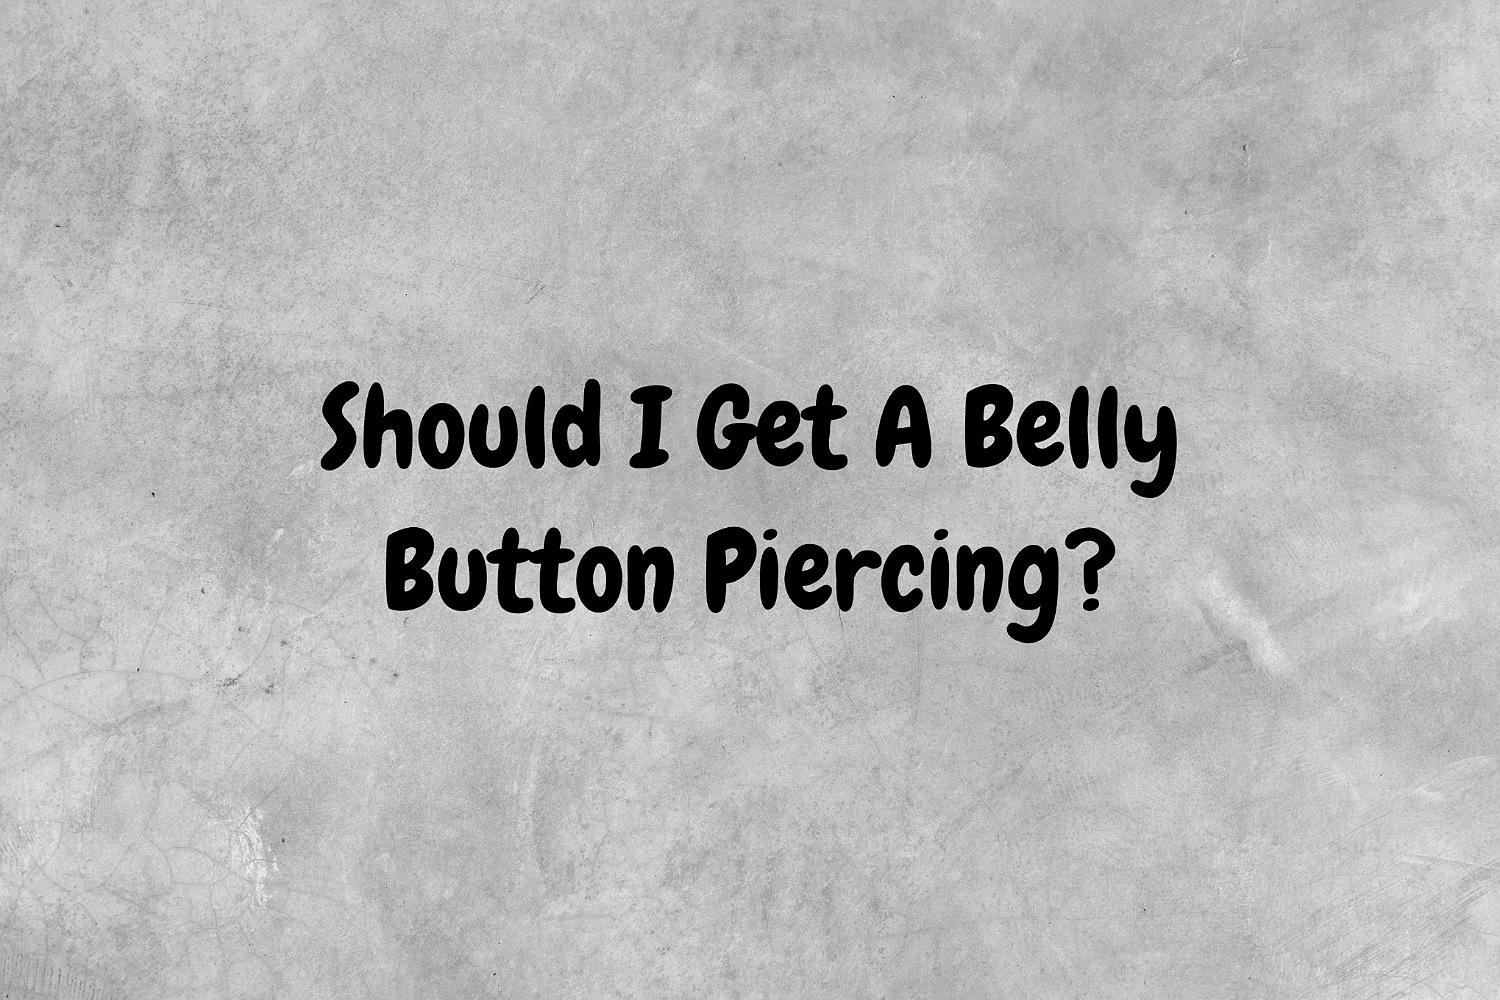 An image with a gray background and black text proposing the question, "Should I get a belly button piercing?"